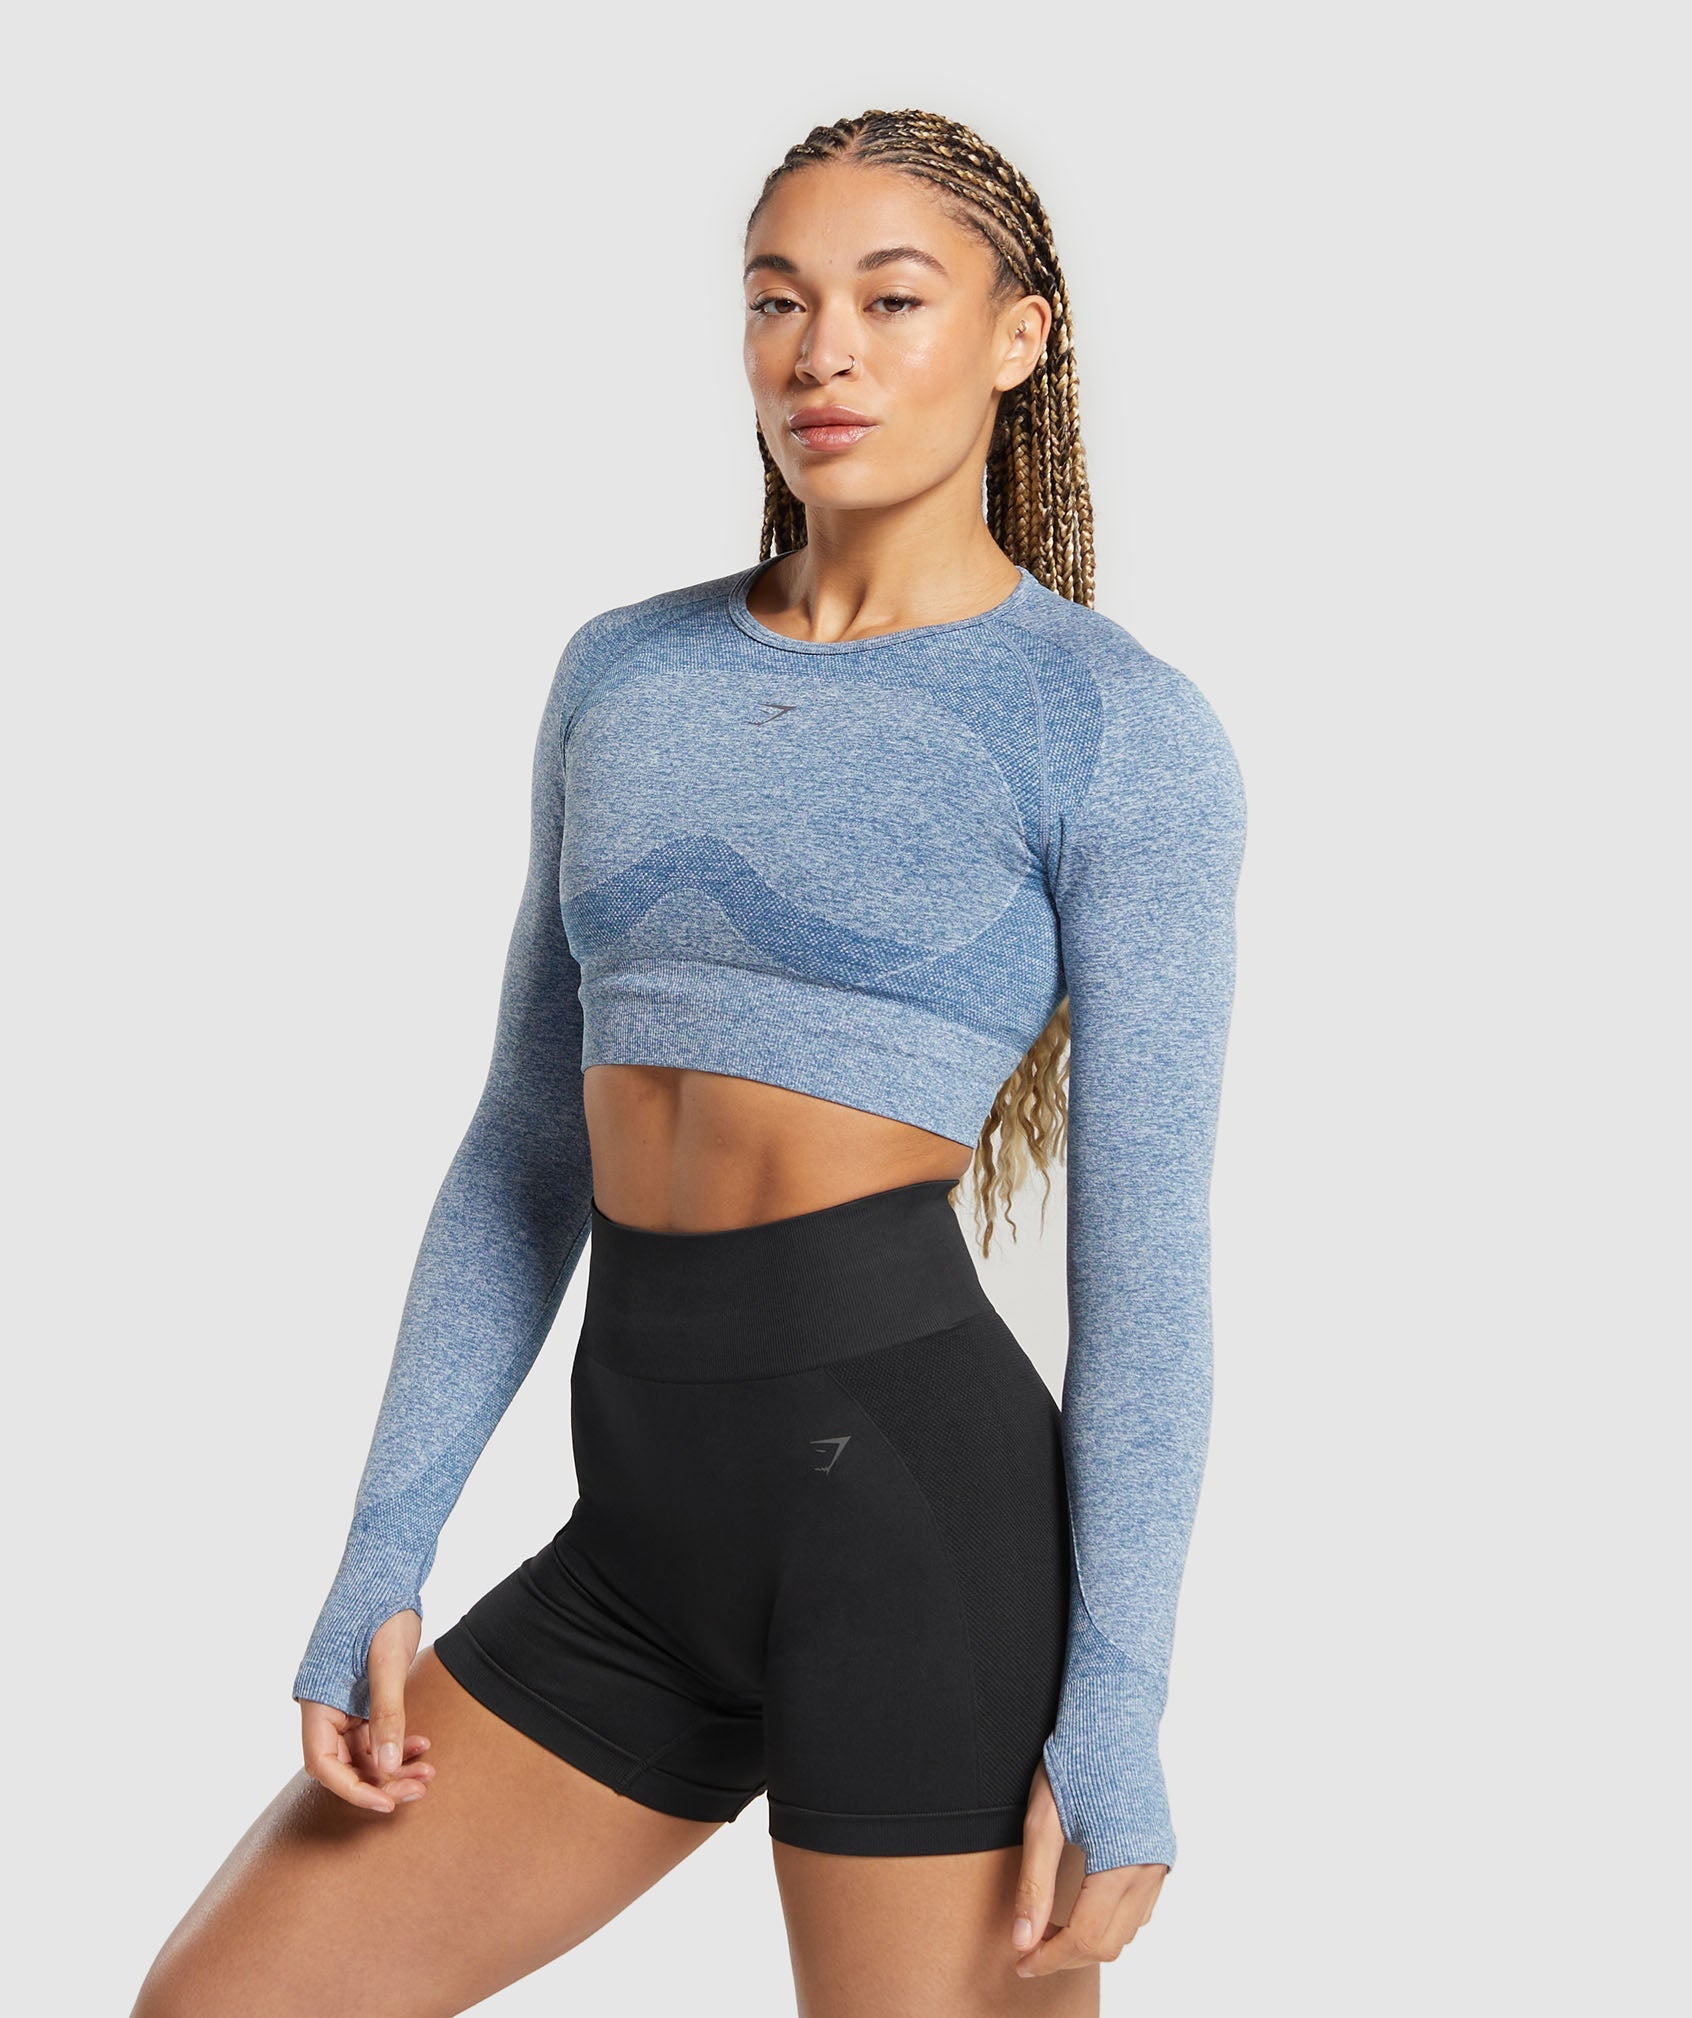 Flex Long Sleeve Crop Top in Faded Blue/Pitch Grey - view 3